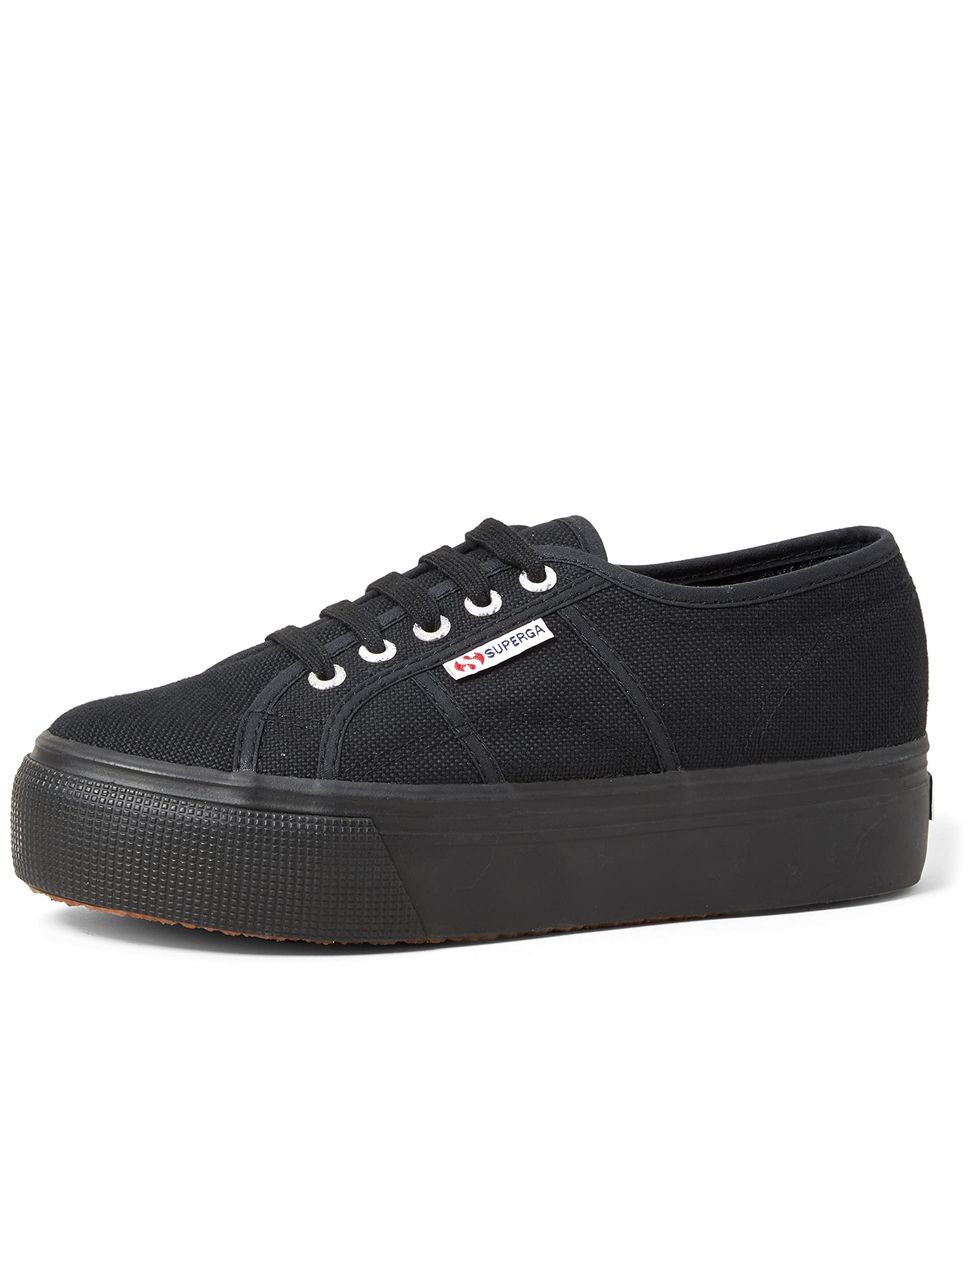 2790 Linea Up Down, Unisex Adults' Low-Top Sneakers